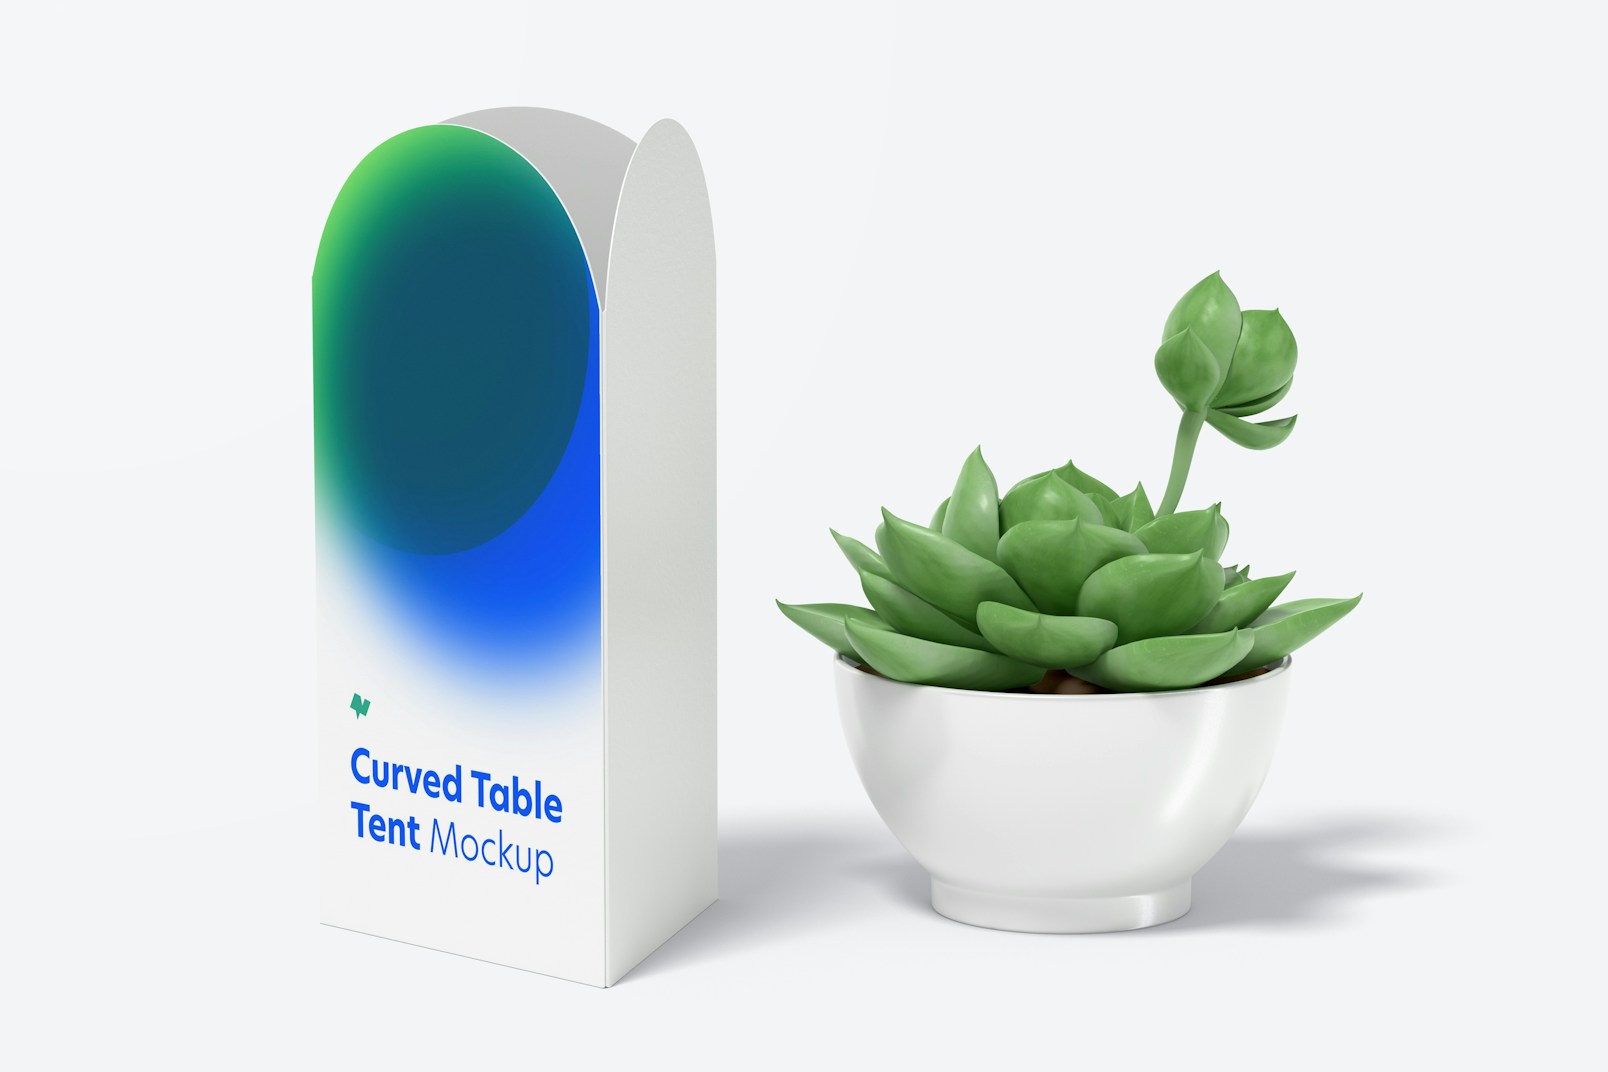 Curved Top Table Tent Mockup